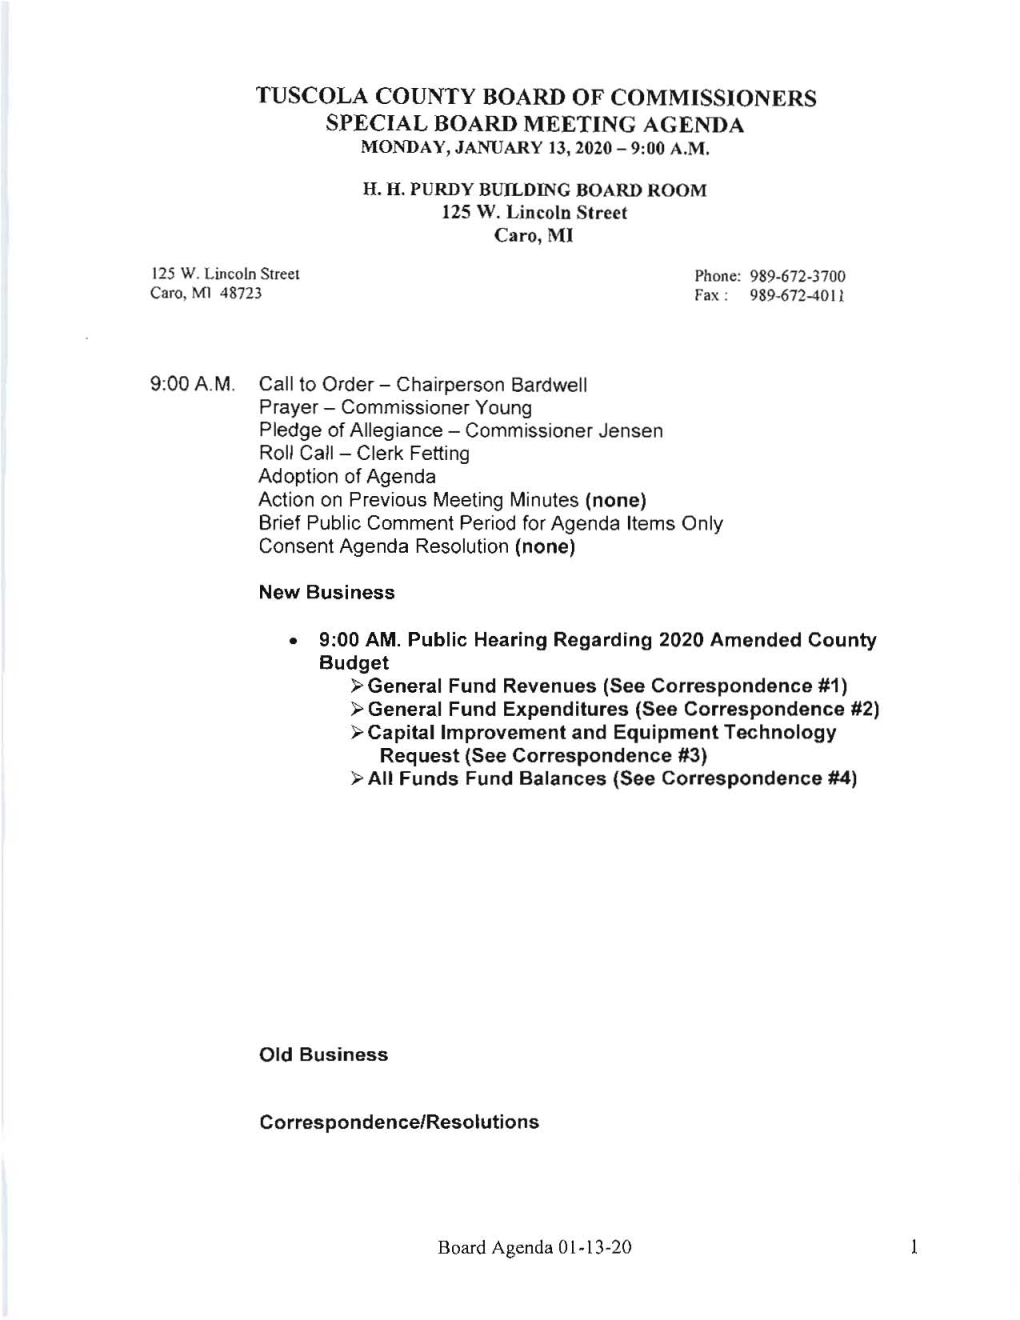 Tuscola County Board of Commissioners Special Board Meeting Agenda Monday, January 13,2020 - 9,00 A.M